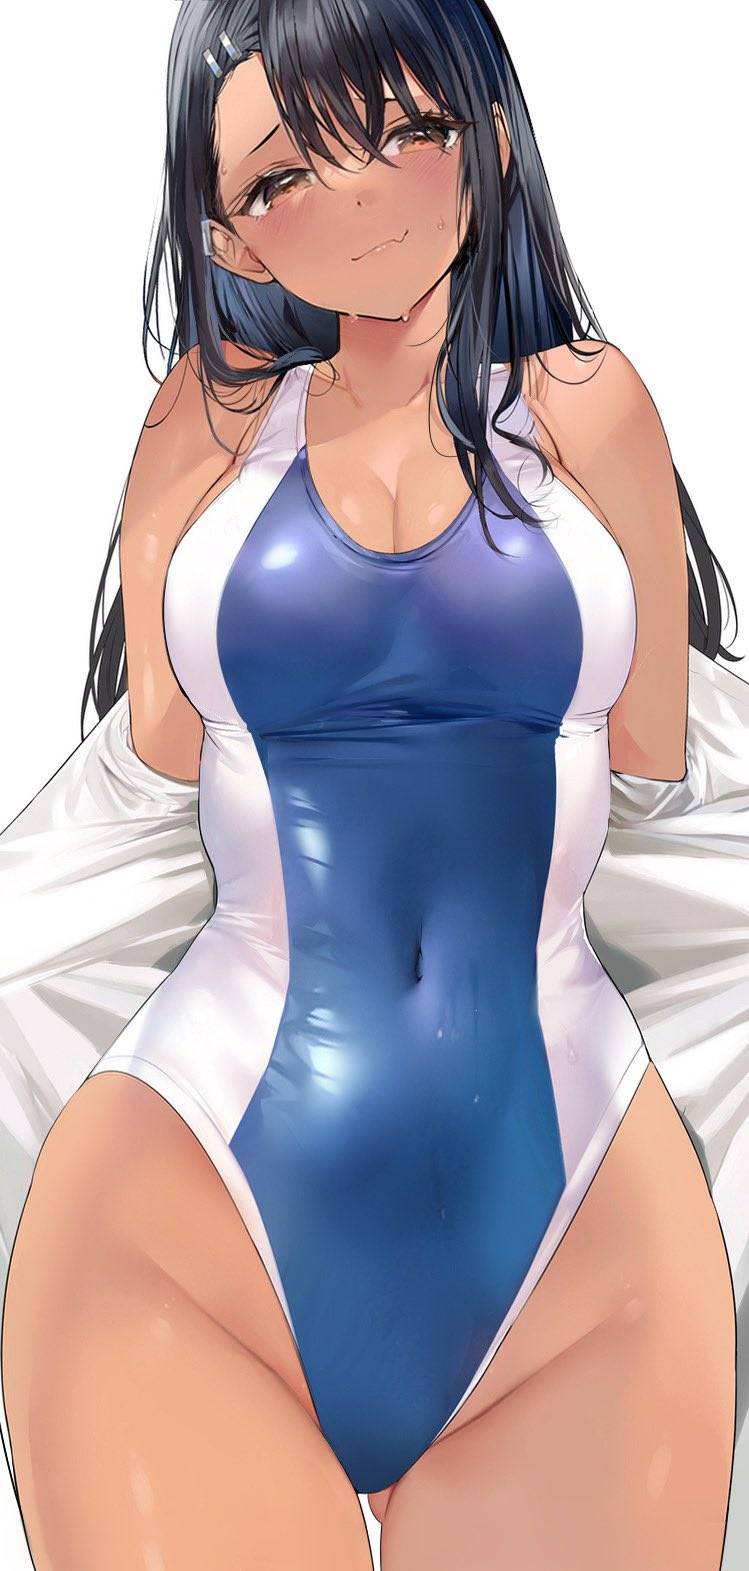 gal Hentai images&pics gallery 106